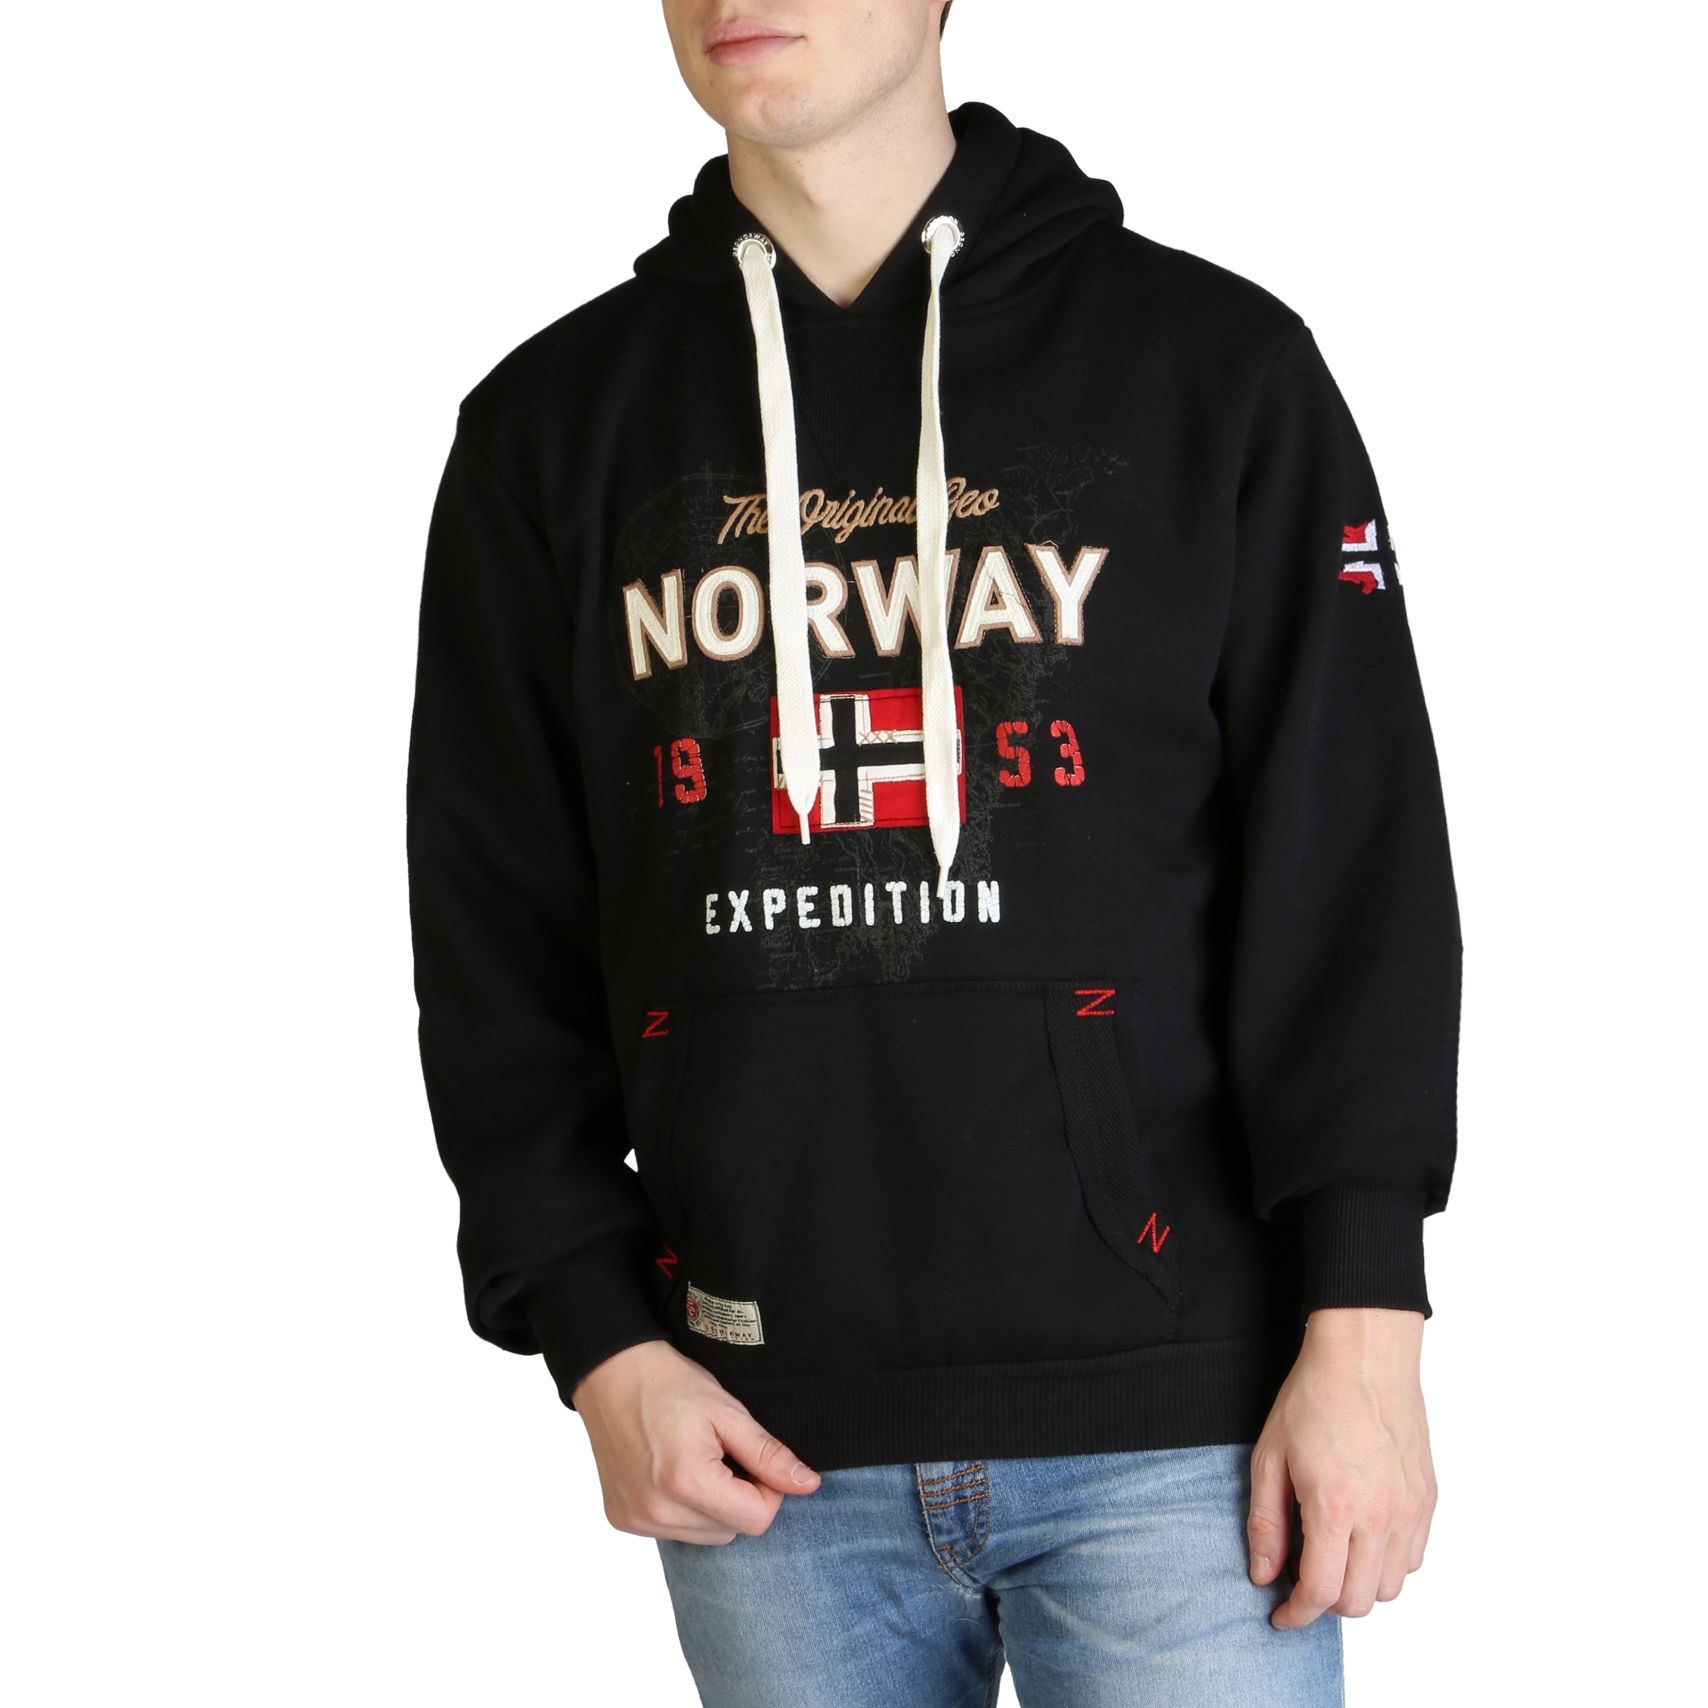 Vêtements sweat-shirts geographical norway homme xl